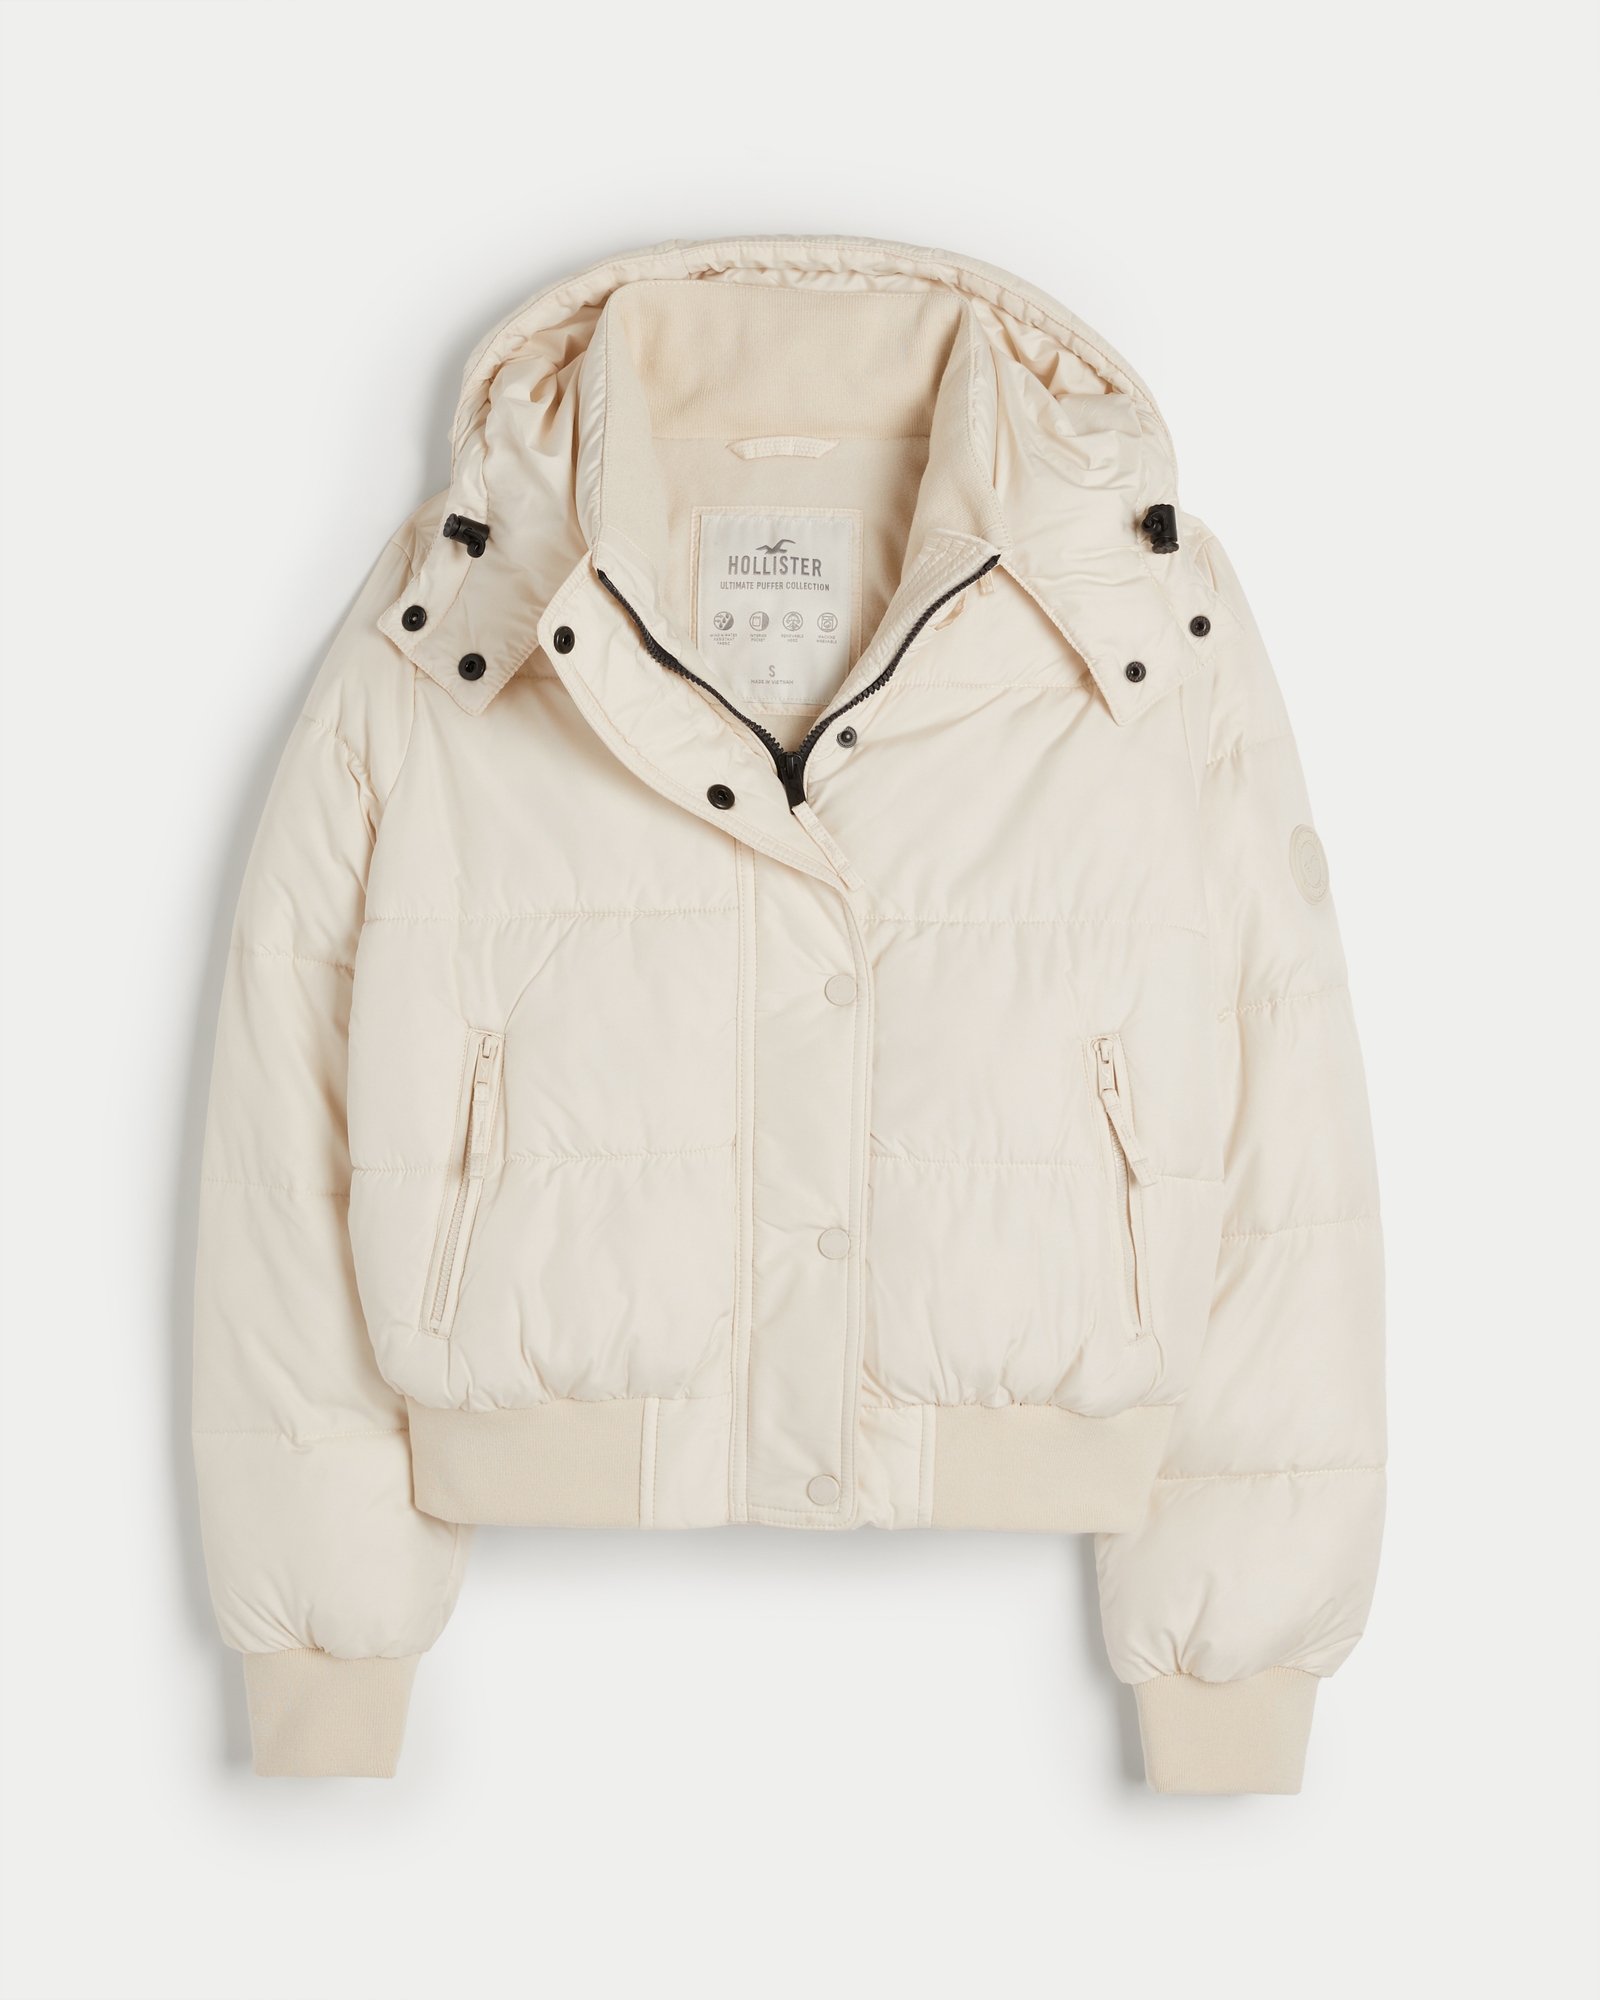 Hollister white puffer jacket, With faux fur hood, a